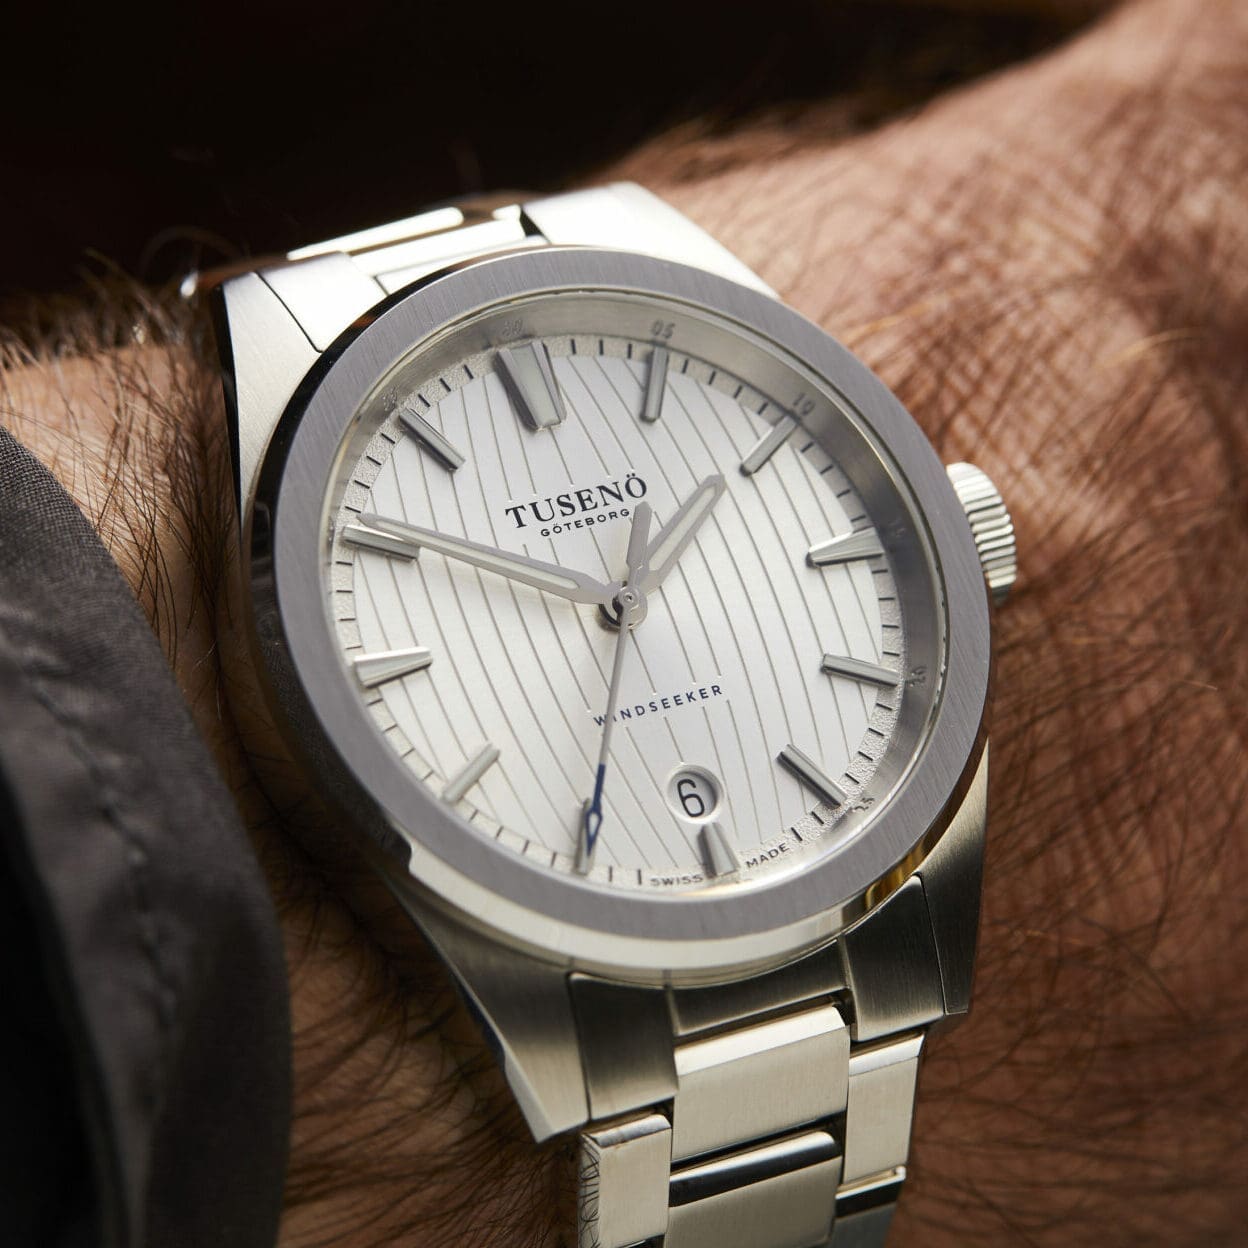 HANDS-ON: The Tusenö Windseeker is a handsome watch with 1970s swagger